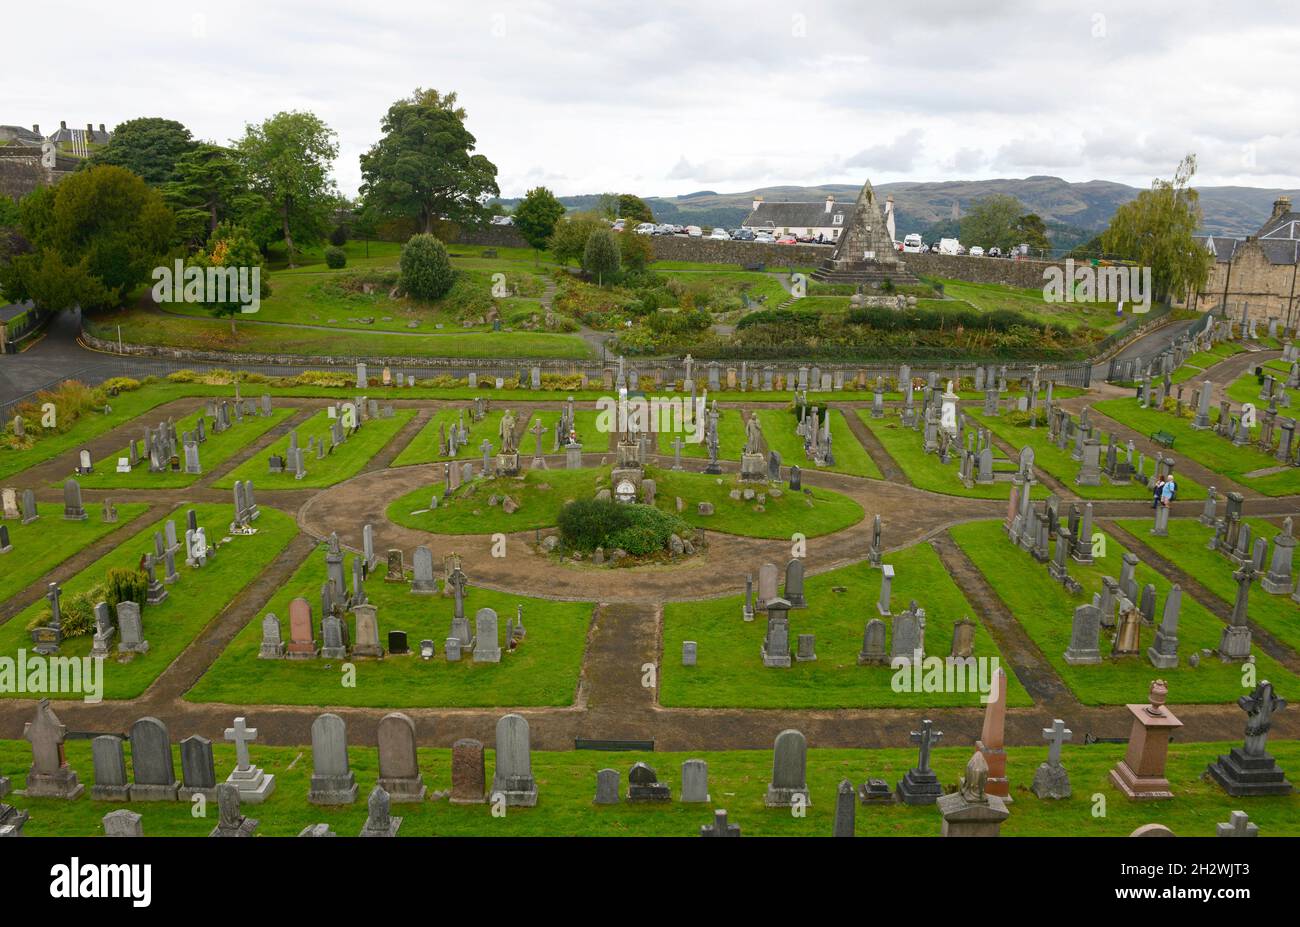 The ancient graveyard of the church of the Holy Rude in Stirling, Scotland. Stock Photo